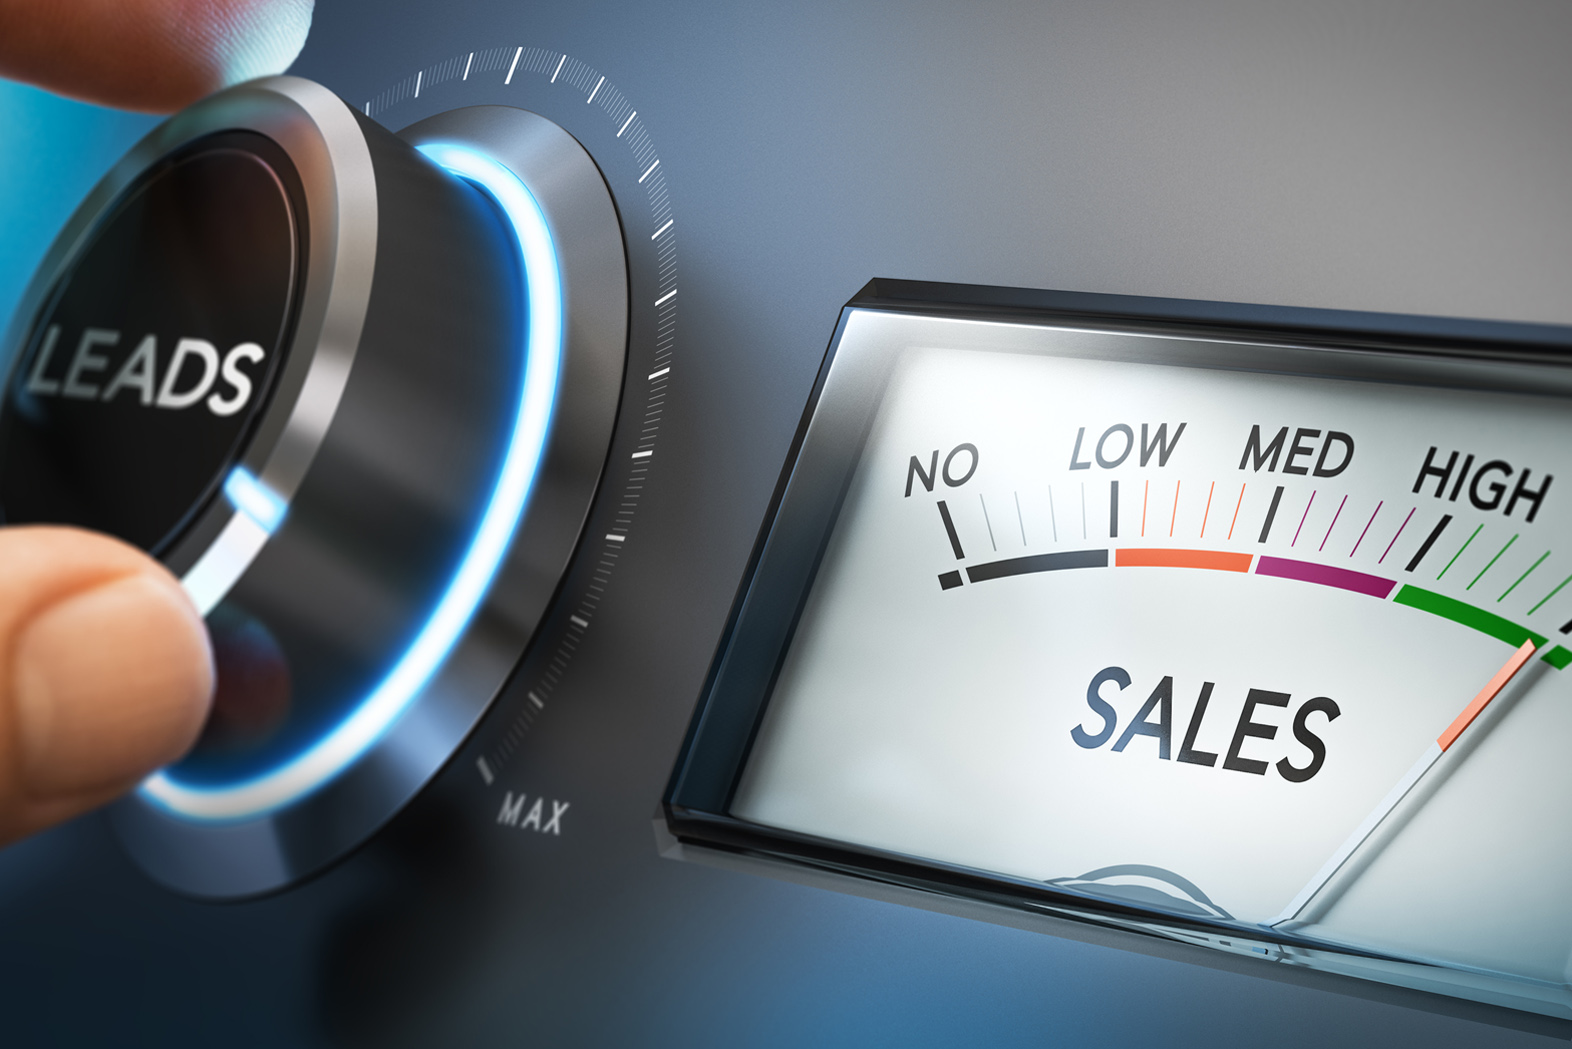 Why are sales so important?